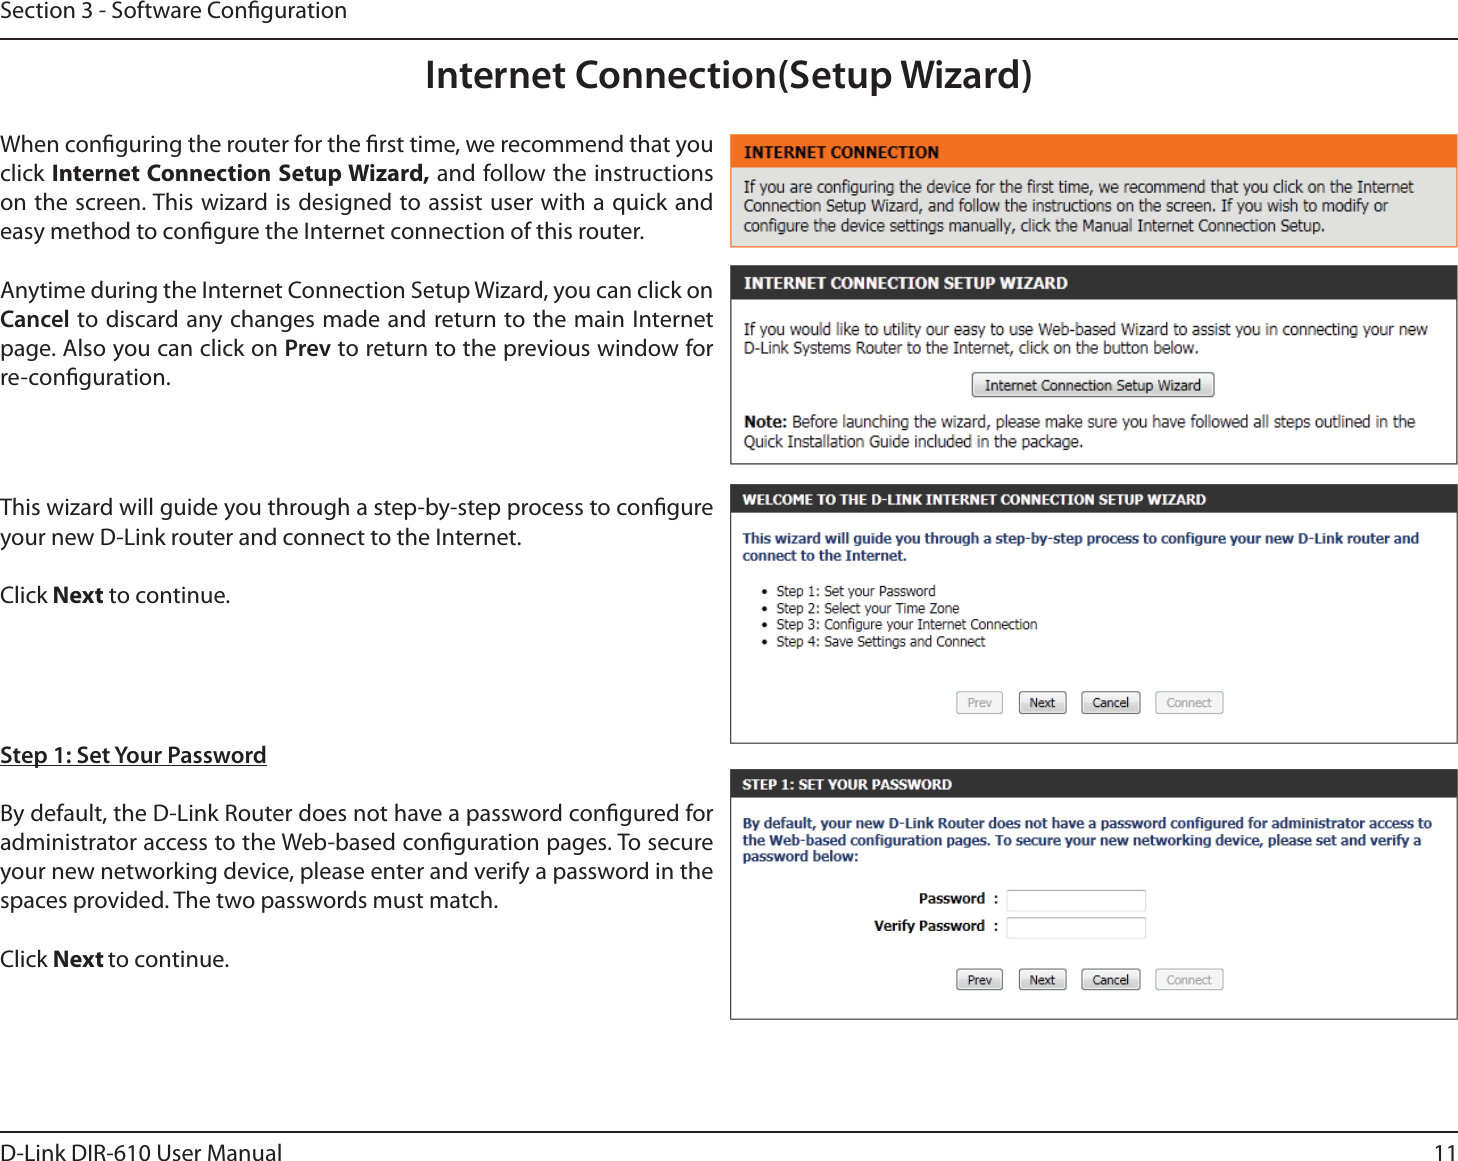 11D-Link DIR-610 User ManualSection 3 - Software CongurationInternet Connection(Setup Wizard)When conguring the router for the rst time, we recommend that you click Internet Connection Setup Wizard, and follow the instructions on the screen. This wizard is designed to assist user with a quick and easy method to congure the Internet connection of this router.Anytime during the Internet Connection Setup Wizard, you can click on Cancel to discard any changes made and return to the main Internet page. Also you can click on Prev to return to the previous window for re-conguration.This wizard will guide you through a step-by-step process to congure your new D-Link router and connect to the Internet. Click Next to continue.Step 1: Set Your PasswordBy default, the D-Link Router does not have a password congured for administrator access to the Web-based conguration pages. To secure your new networking device, please enter and verify a password in the spaces provided. The two passwords must match.Click Next to continue.